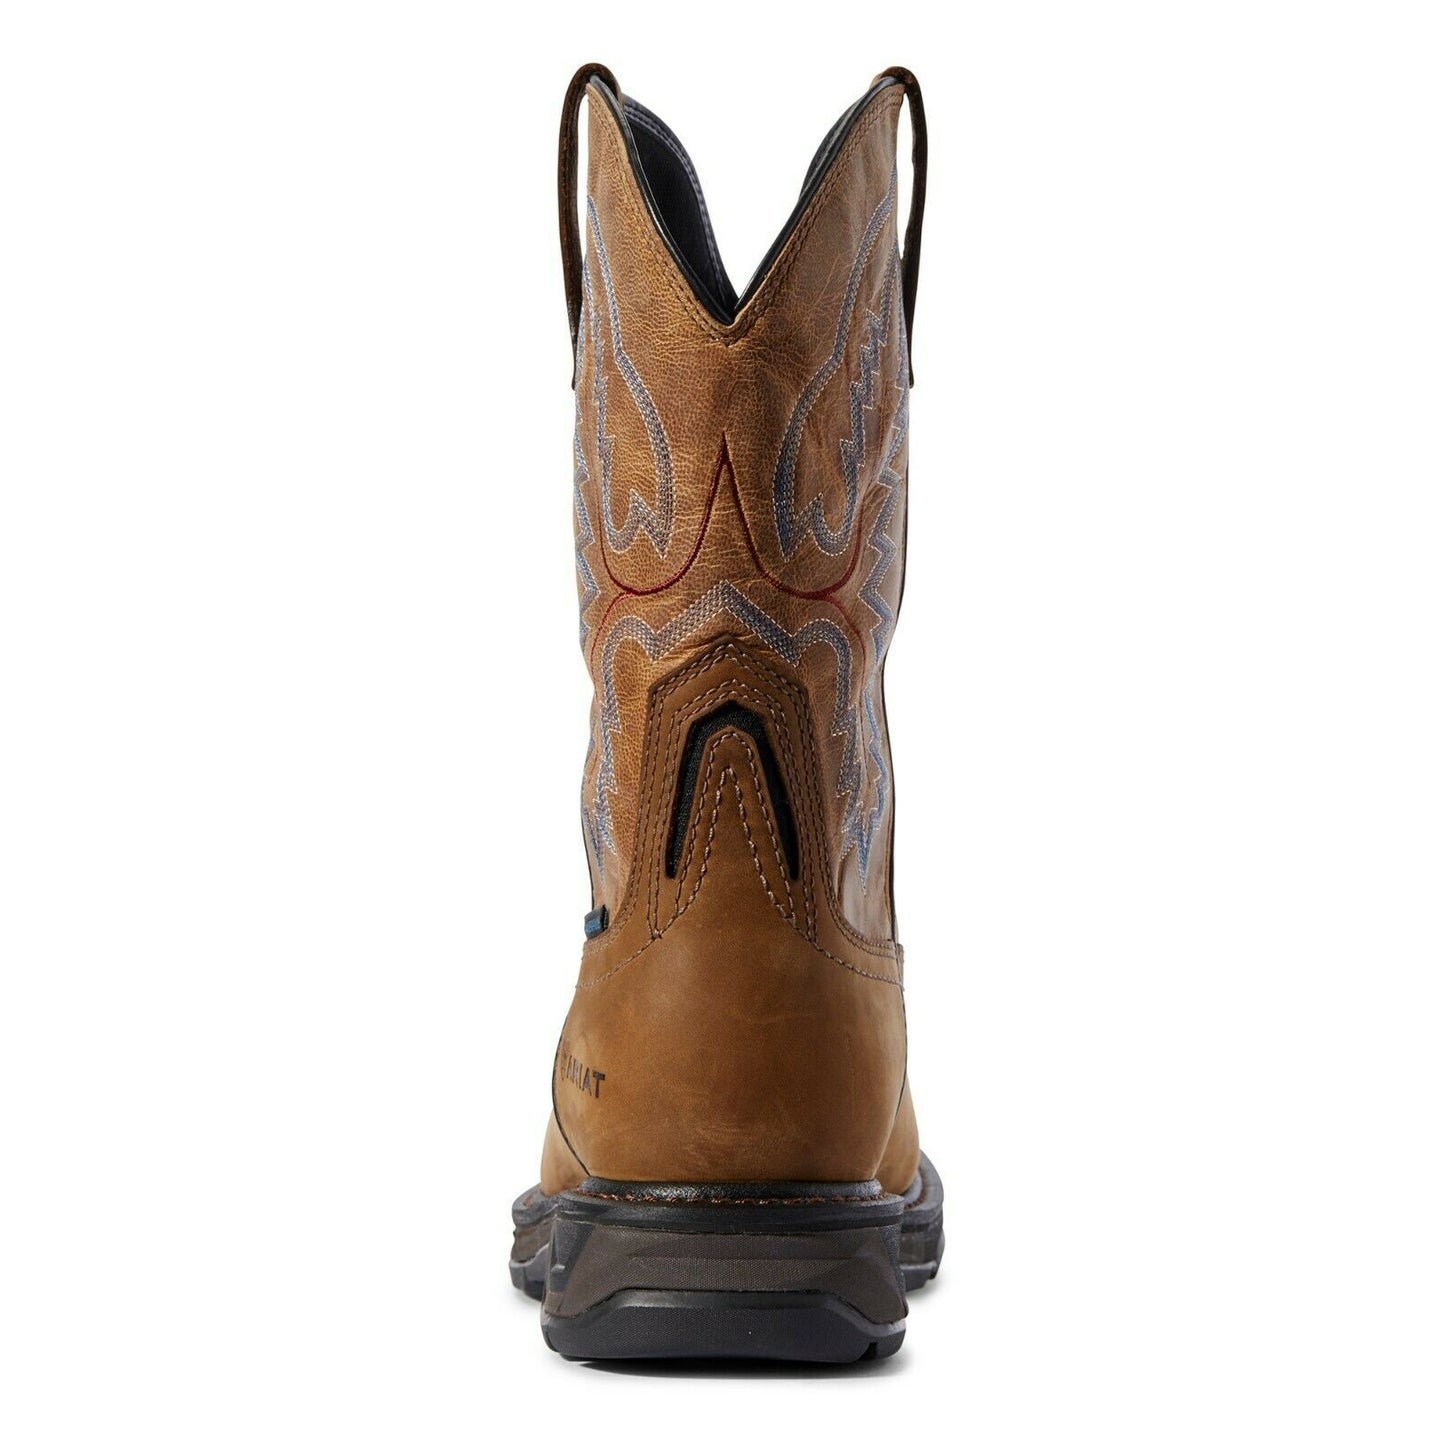 Ariat® Men's Brown WorkHog® XT Wide Square Toe H2O Boots 10031474